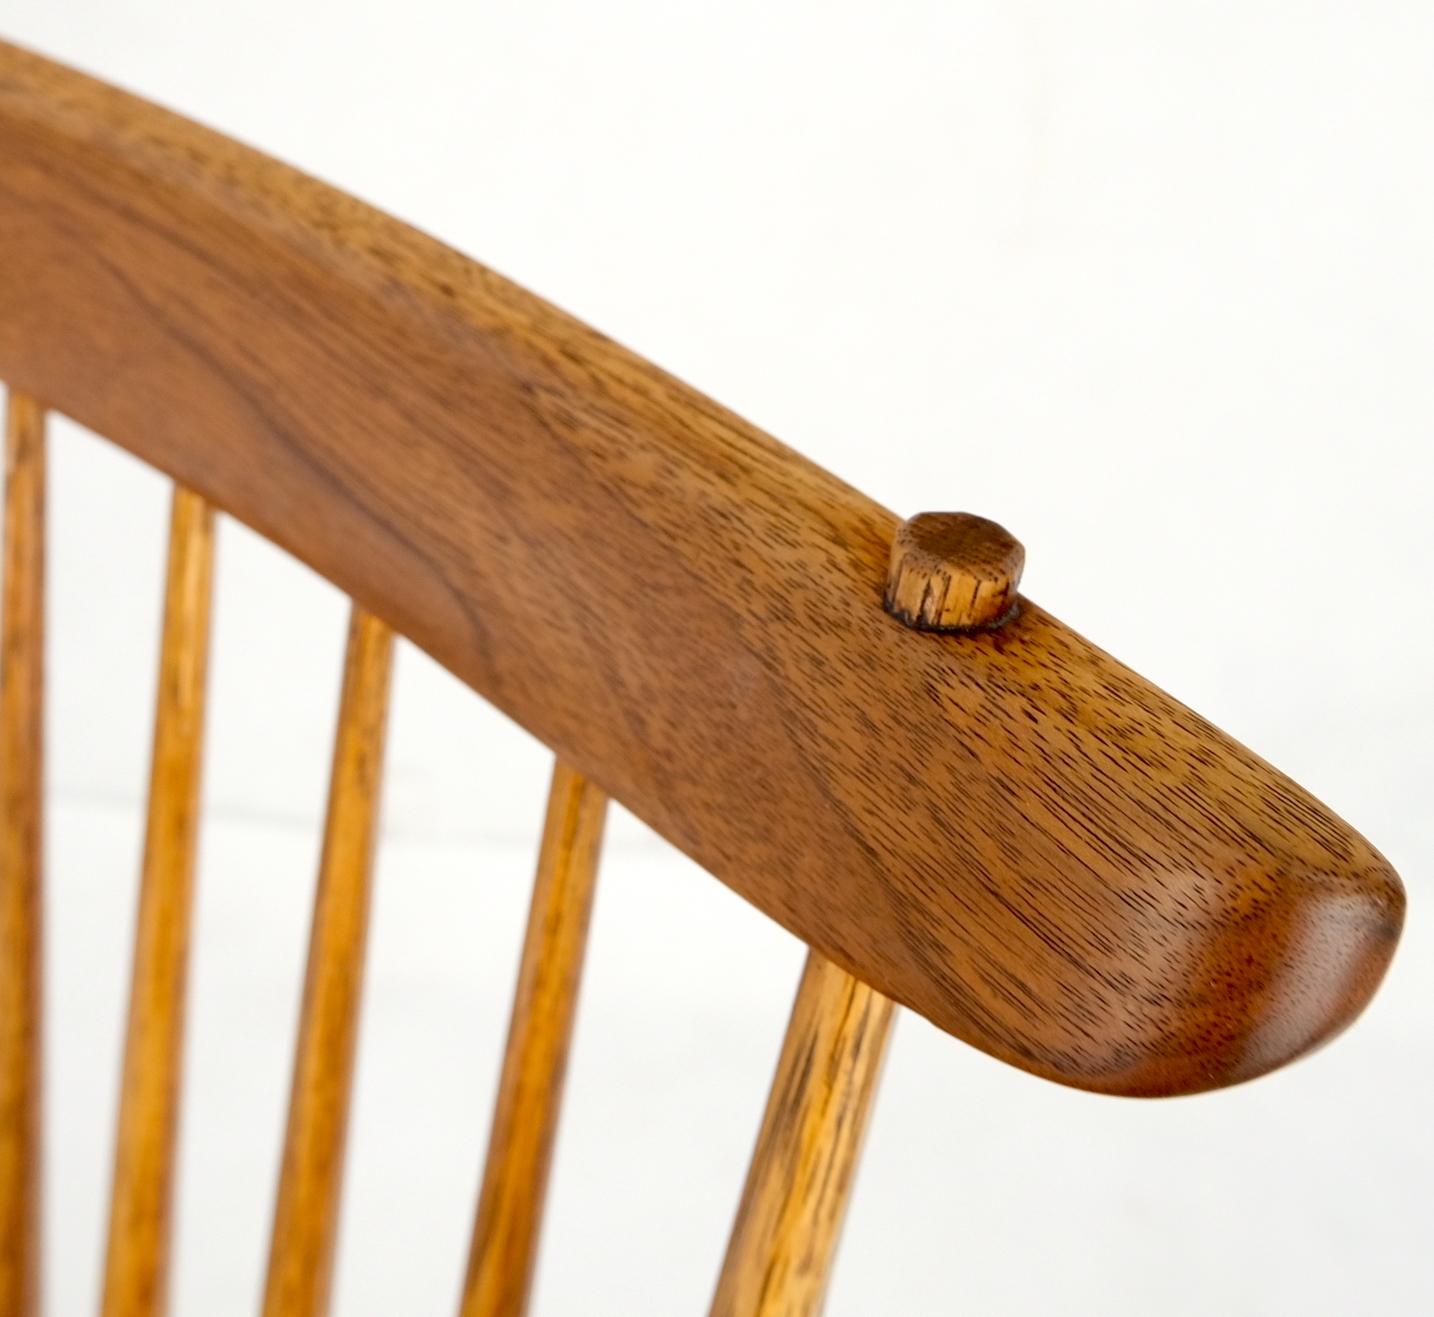 American Mid-Century Modern Solid Oiled Walnut George Nakashima Slab-Arm Lounge Chair For Sale